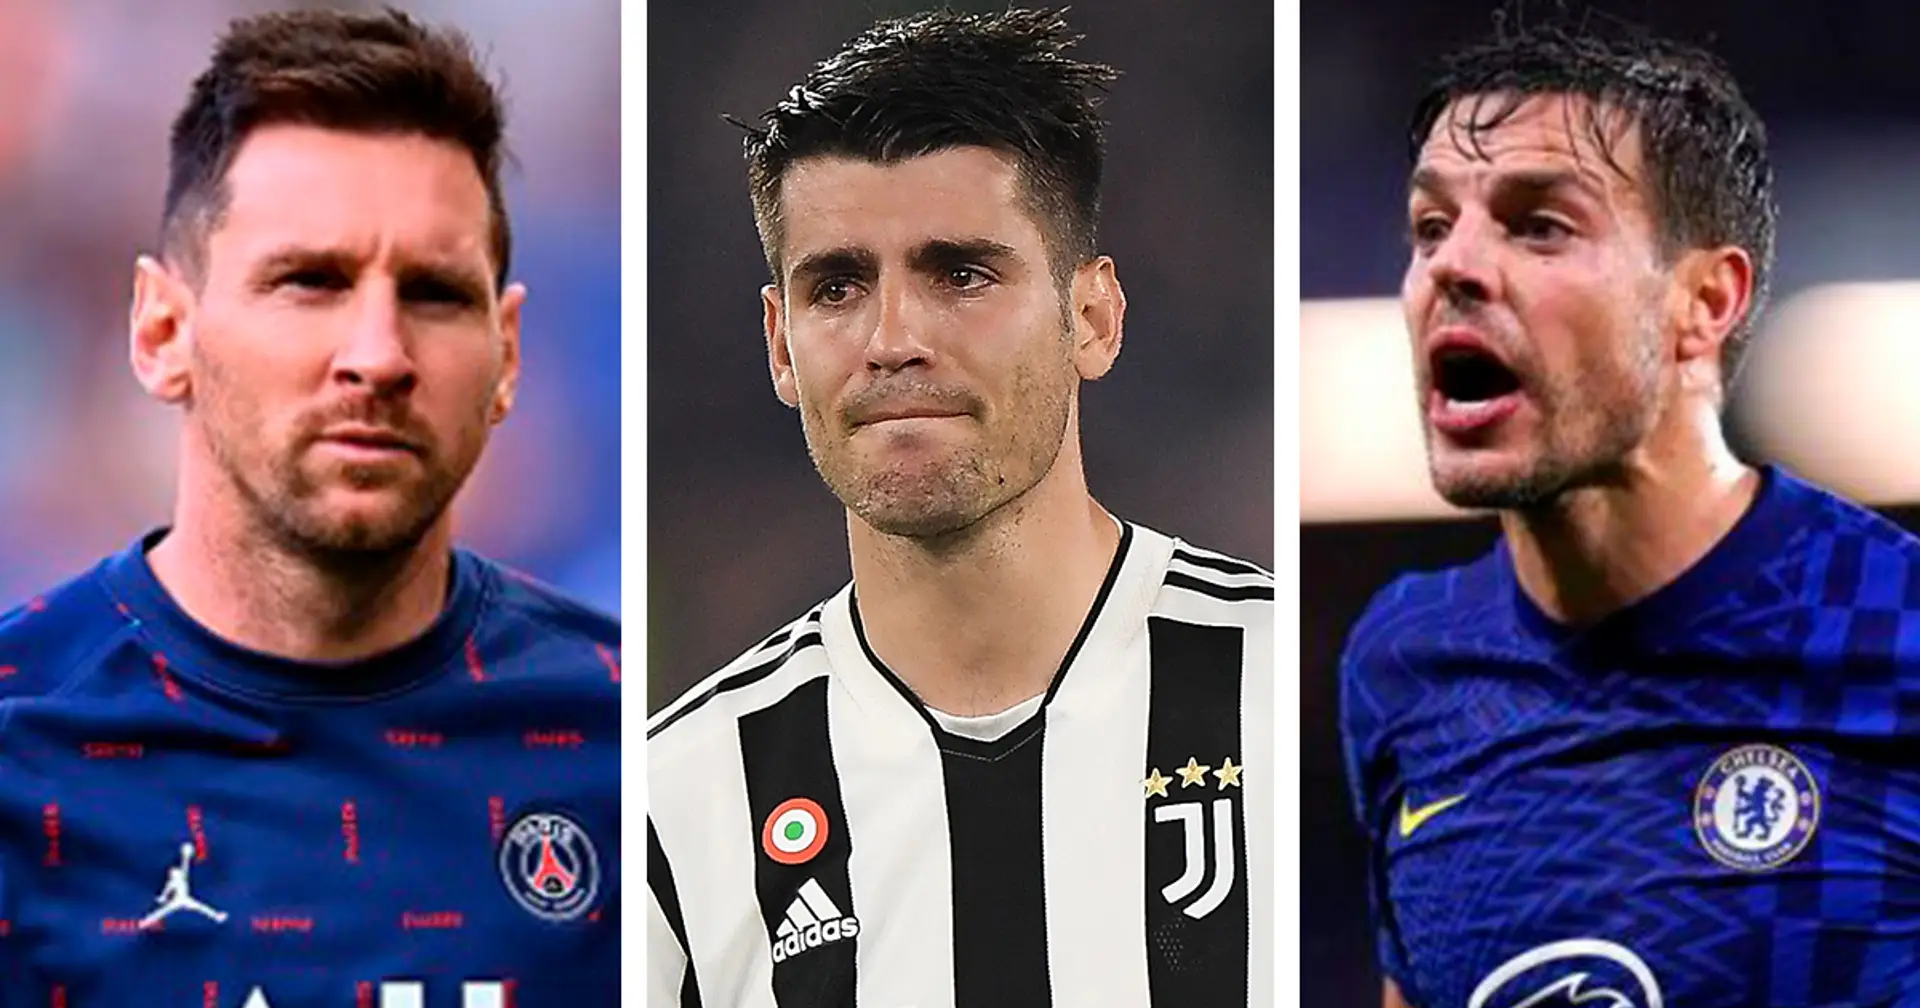 Atletico offer Morata as part of Griezmann deal and 3 more big stories you might've missed